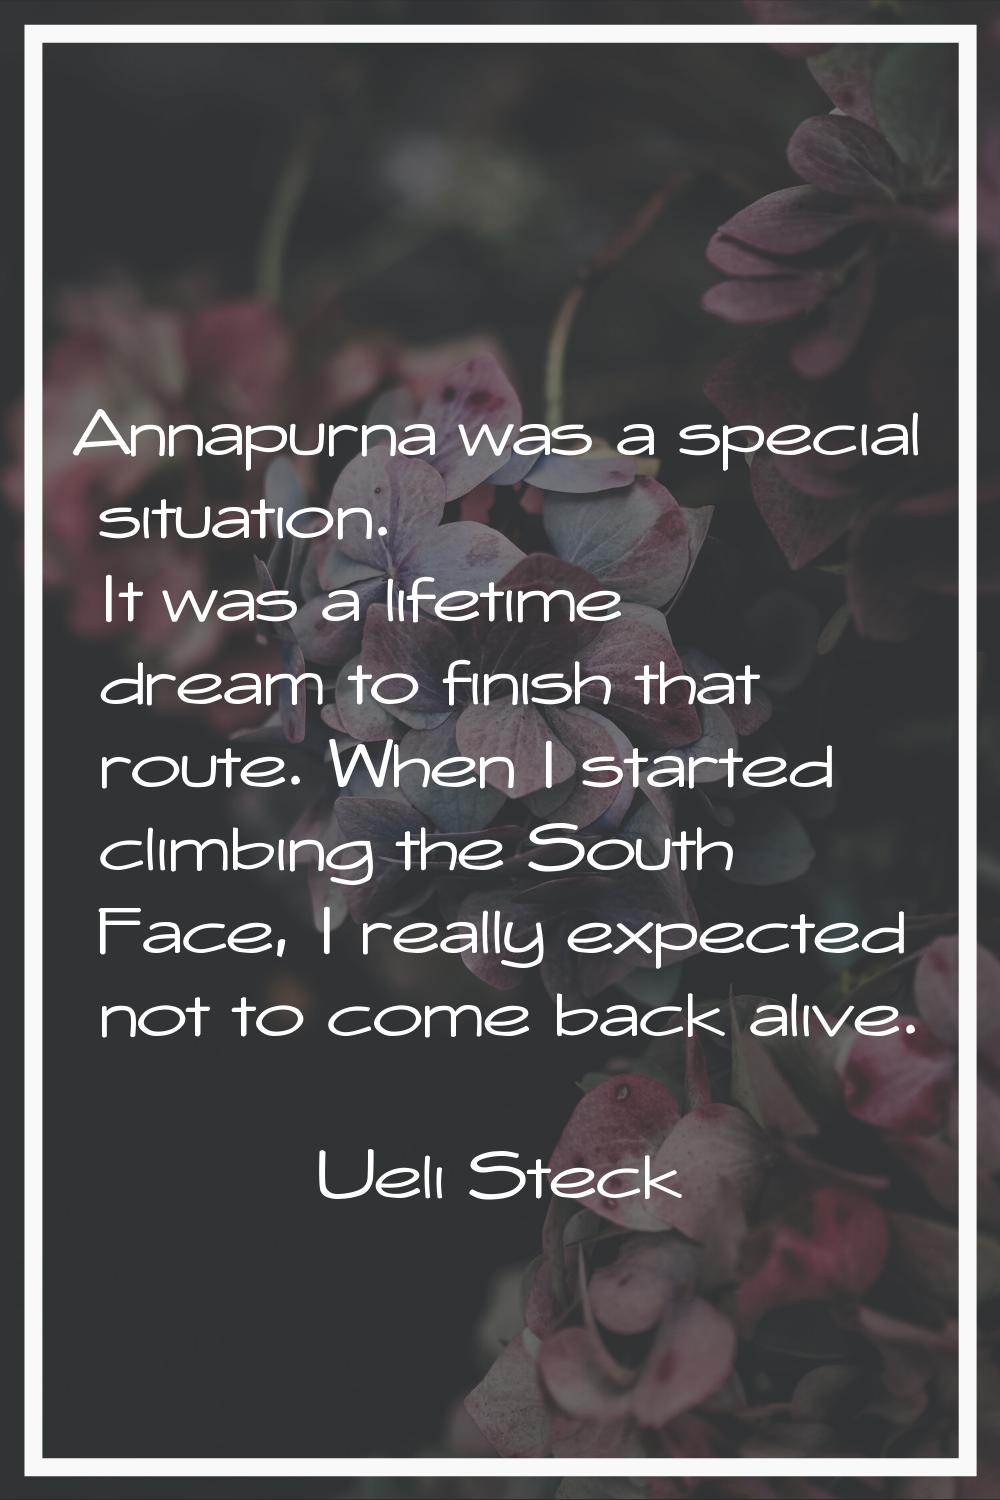 Annapurna was a special situation. It was a lifetime dream to finish that route. When I started cli